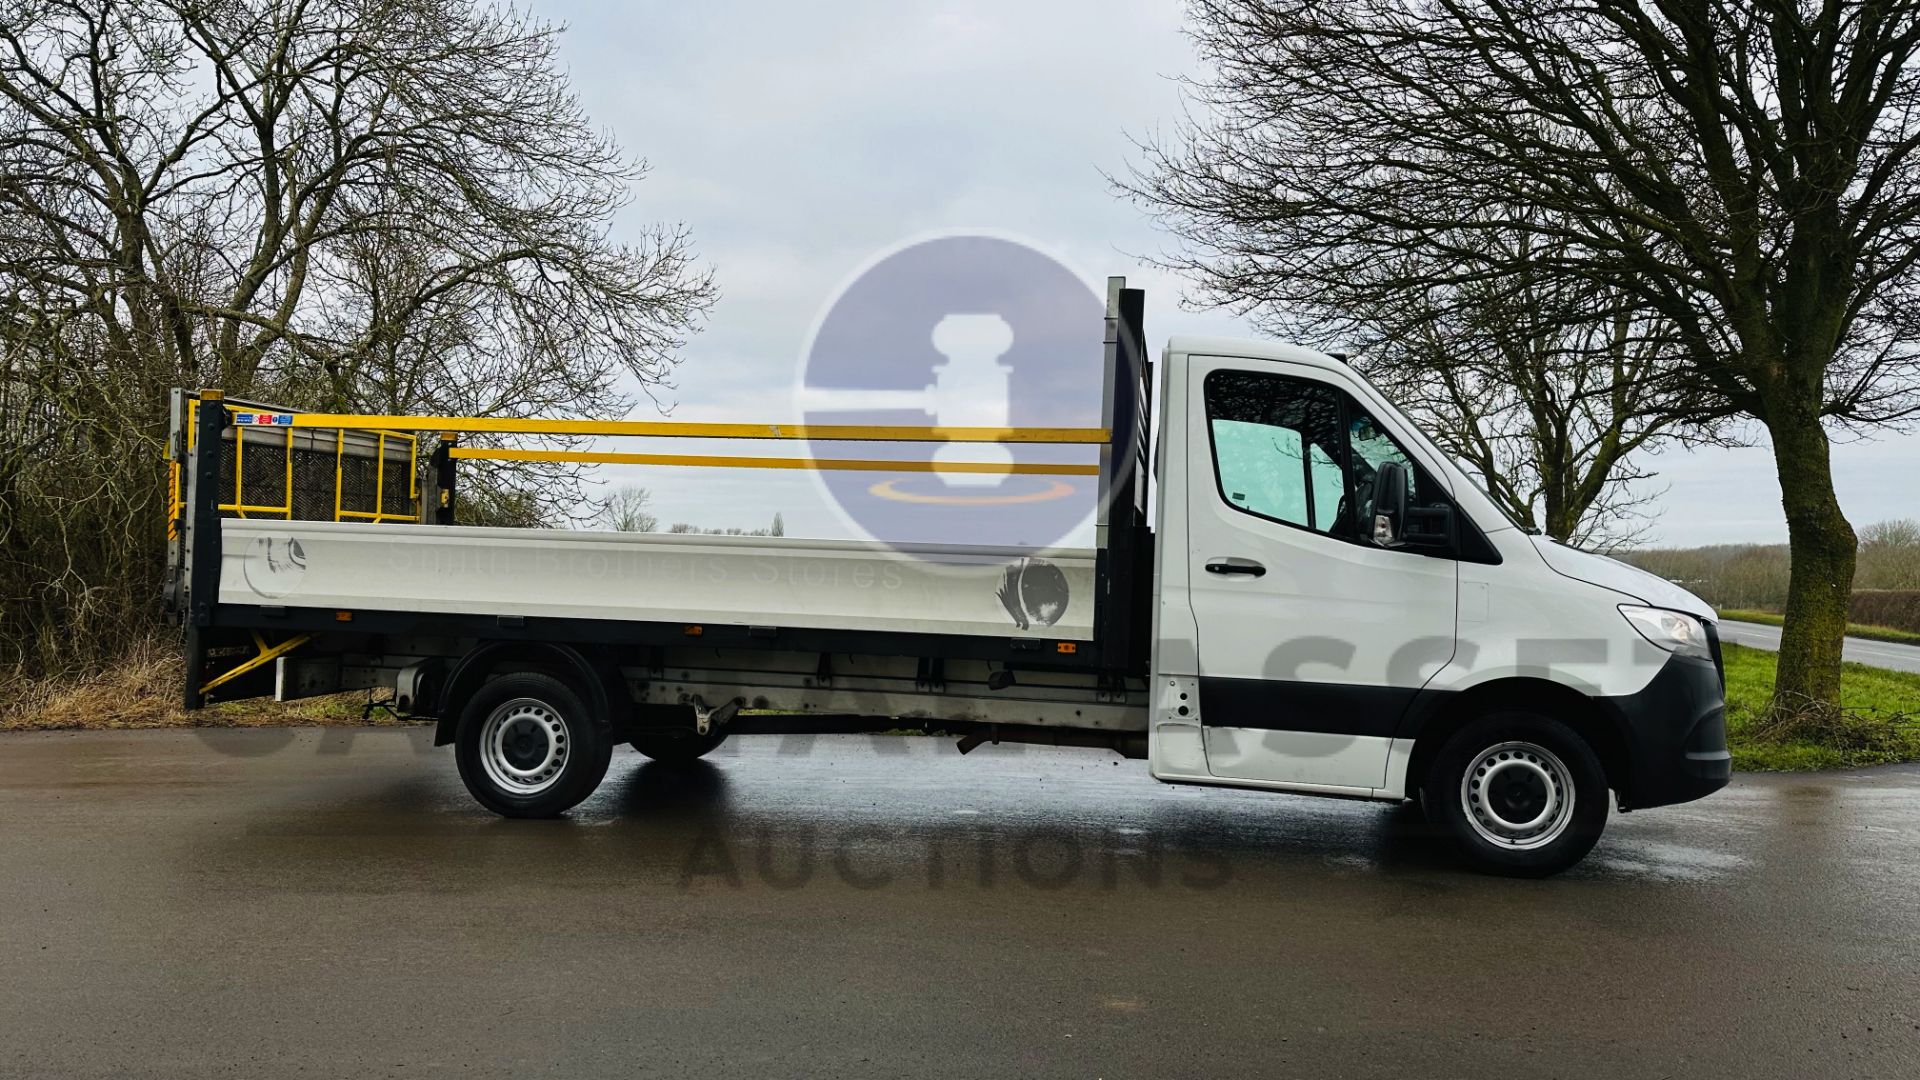 MERCEDES-BENZ SPRINTER 314 CDI *LWB - DROPSIDE* (2019 - EURO 6) AUTOMATIC *TAIL-LIFT* (3500 KG) - Image 14 of 40